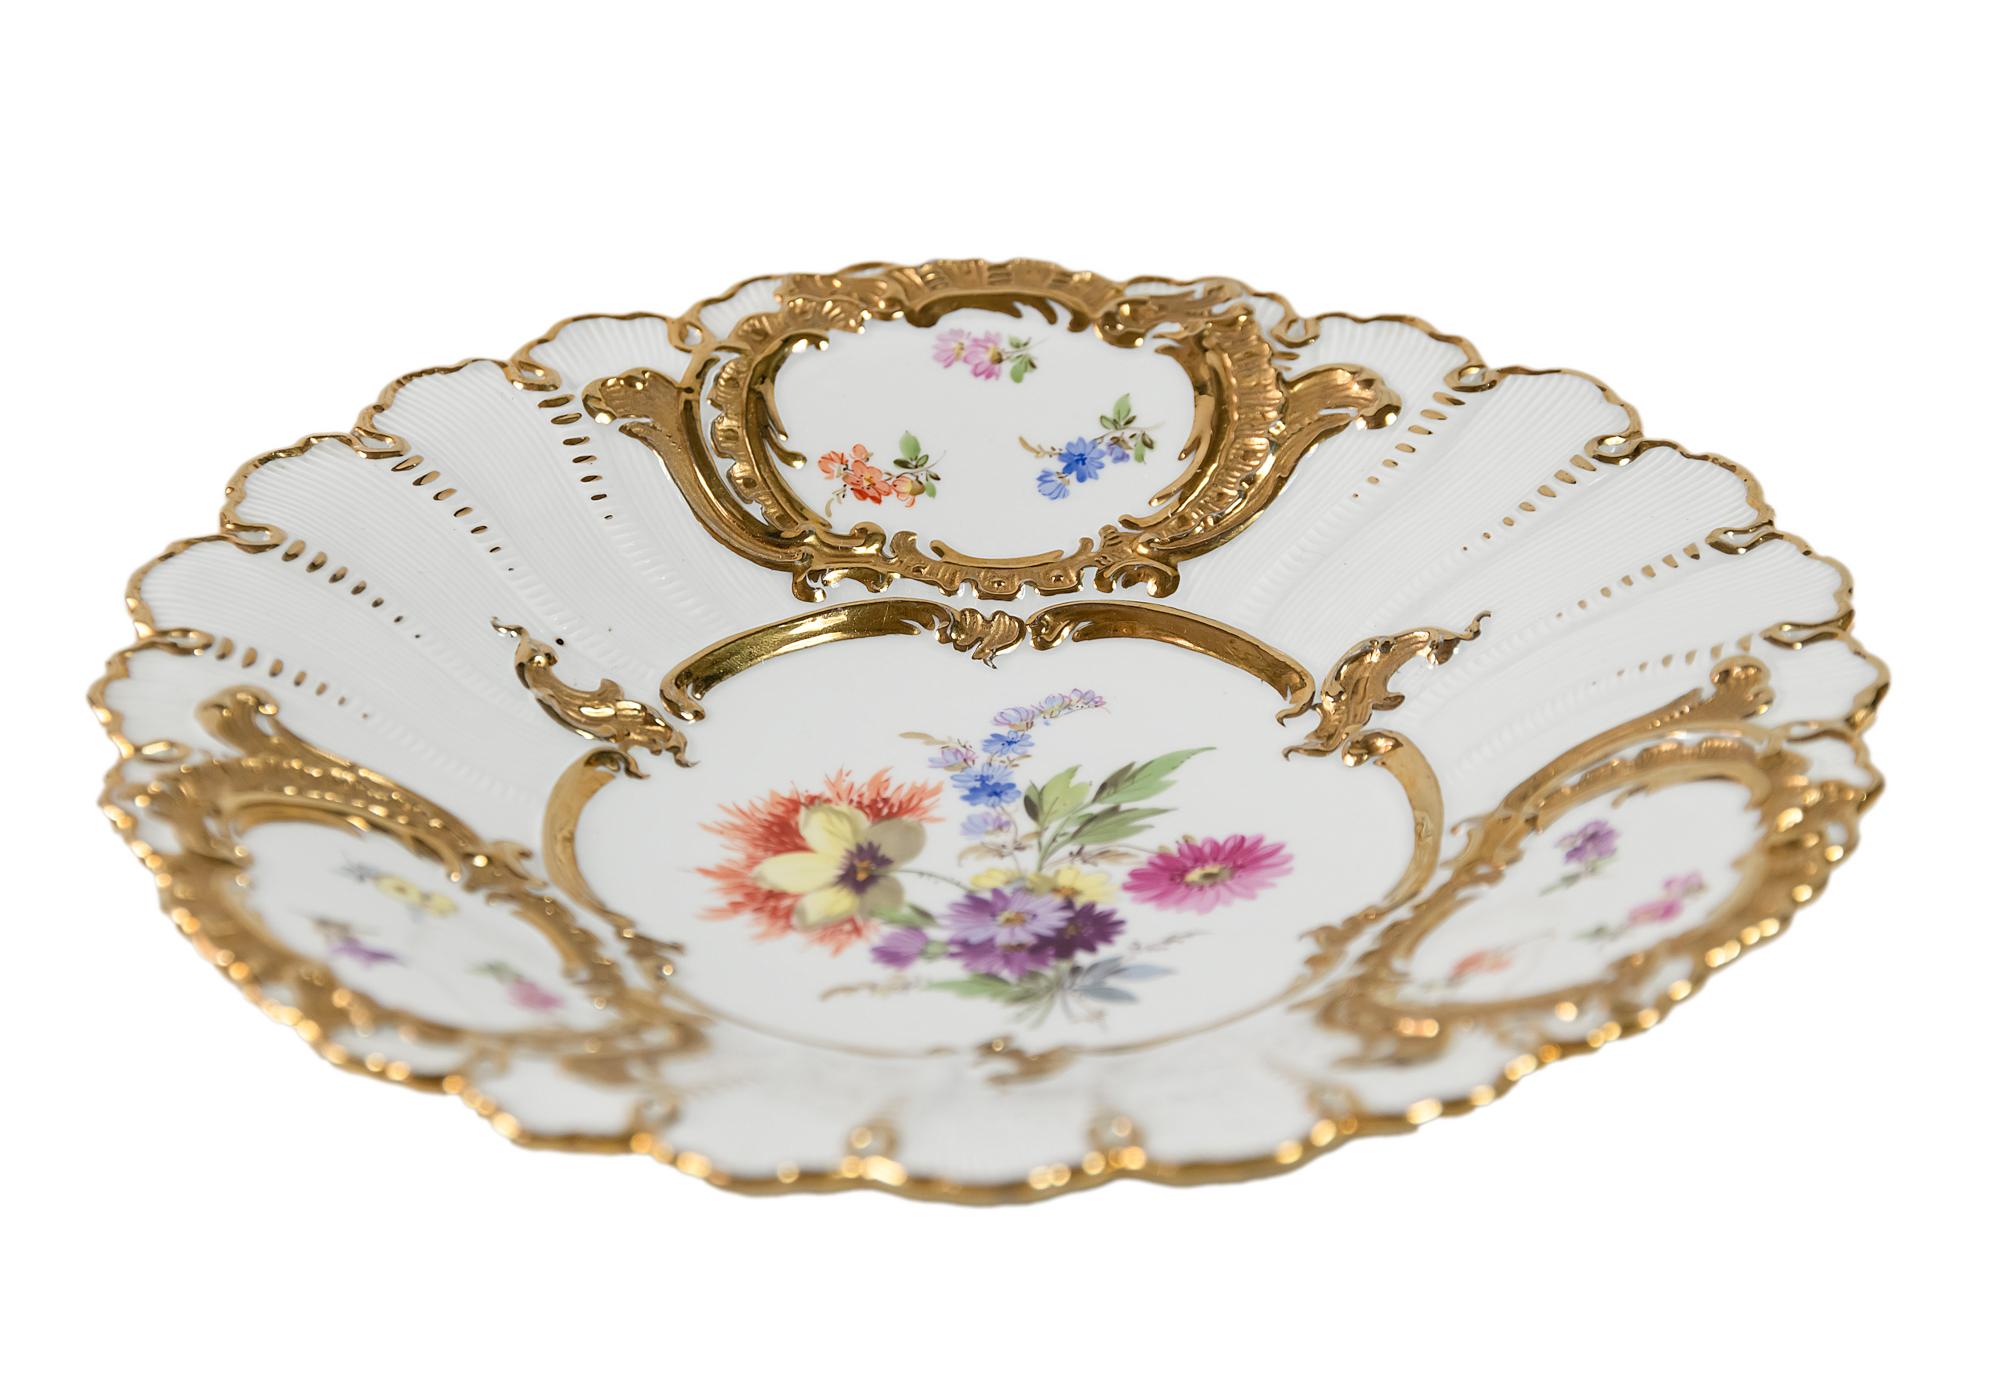 Meissen Porcelain plate with hand painted floral motives and gold decor.